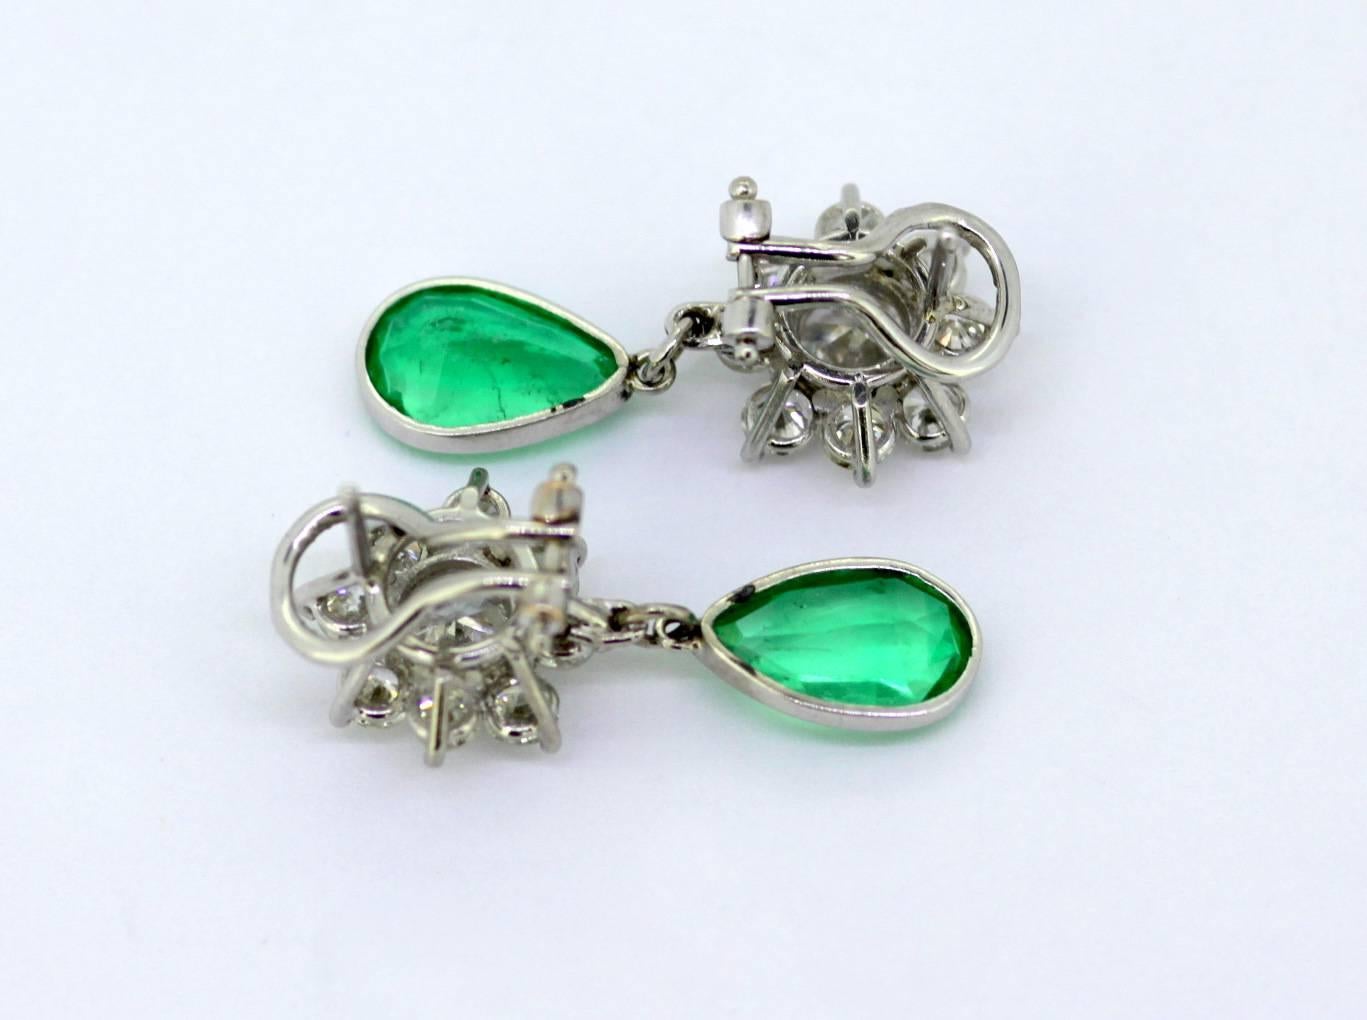 18 Karat White Gold Ladies Clip-On Earrings with Diamonds and Emerald 4